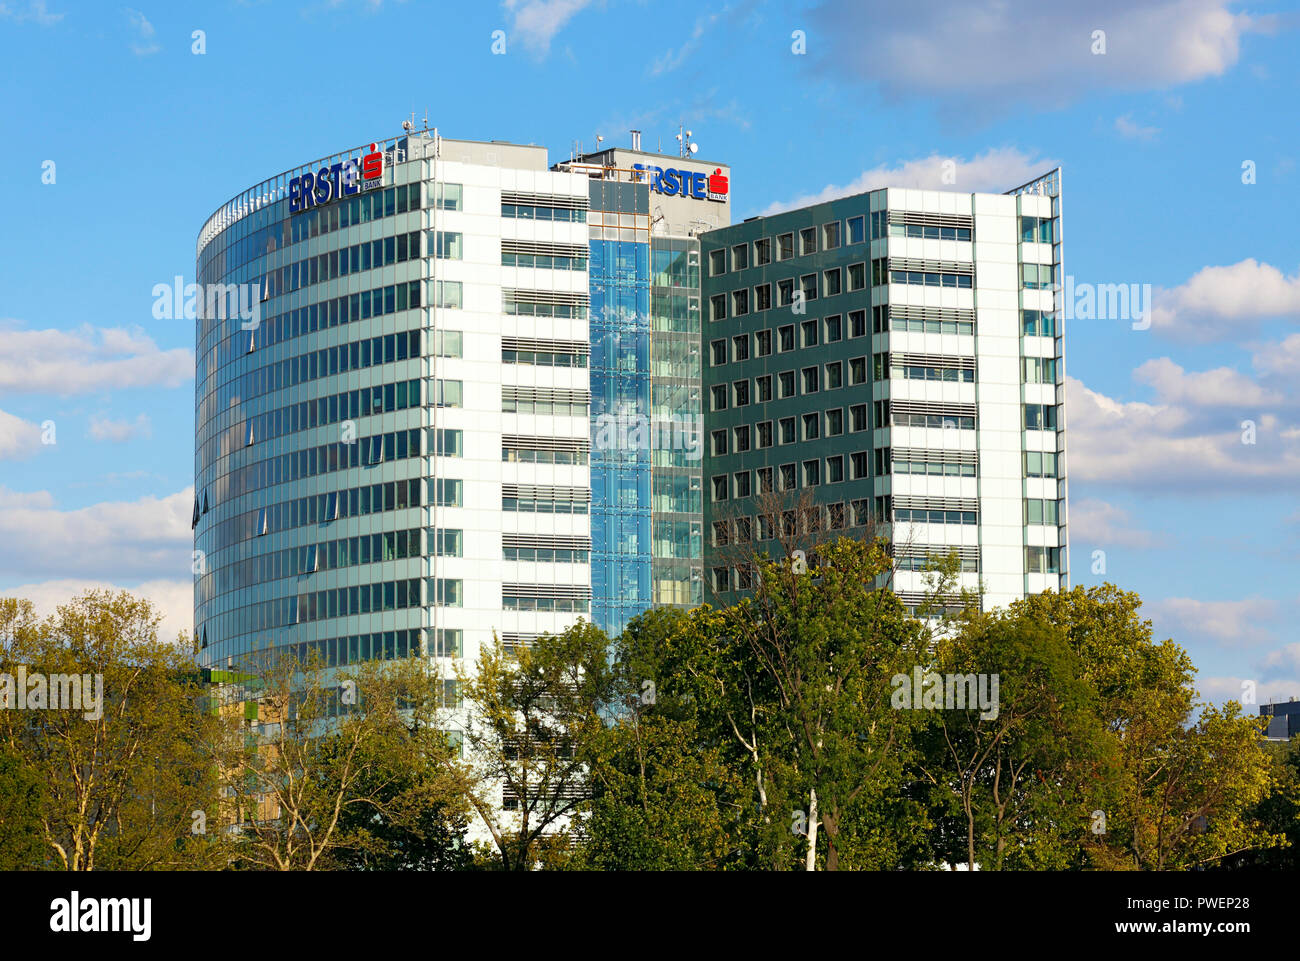 Hungary, Central Hungary, Budapest, Danube, Capital City, bank building, highrise, Erste Bank ATM, Erste Bank Hungary, Sparkasse Austria, Erste Bank Austria, Erste Group Bank AG, economy, trade, UNESCO World Heritage Site Stock Photo